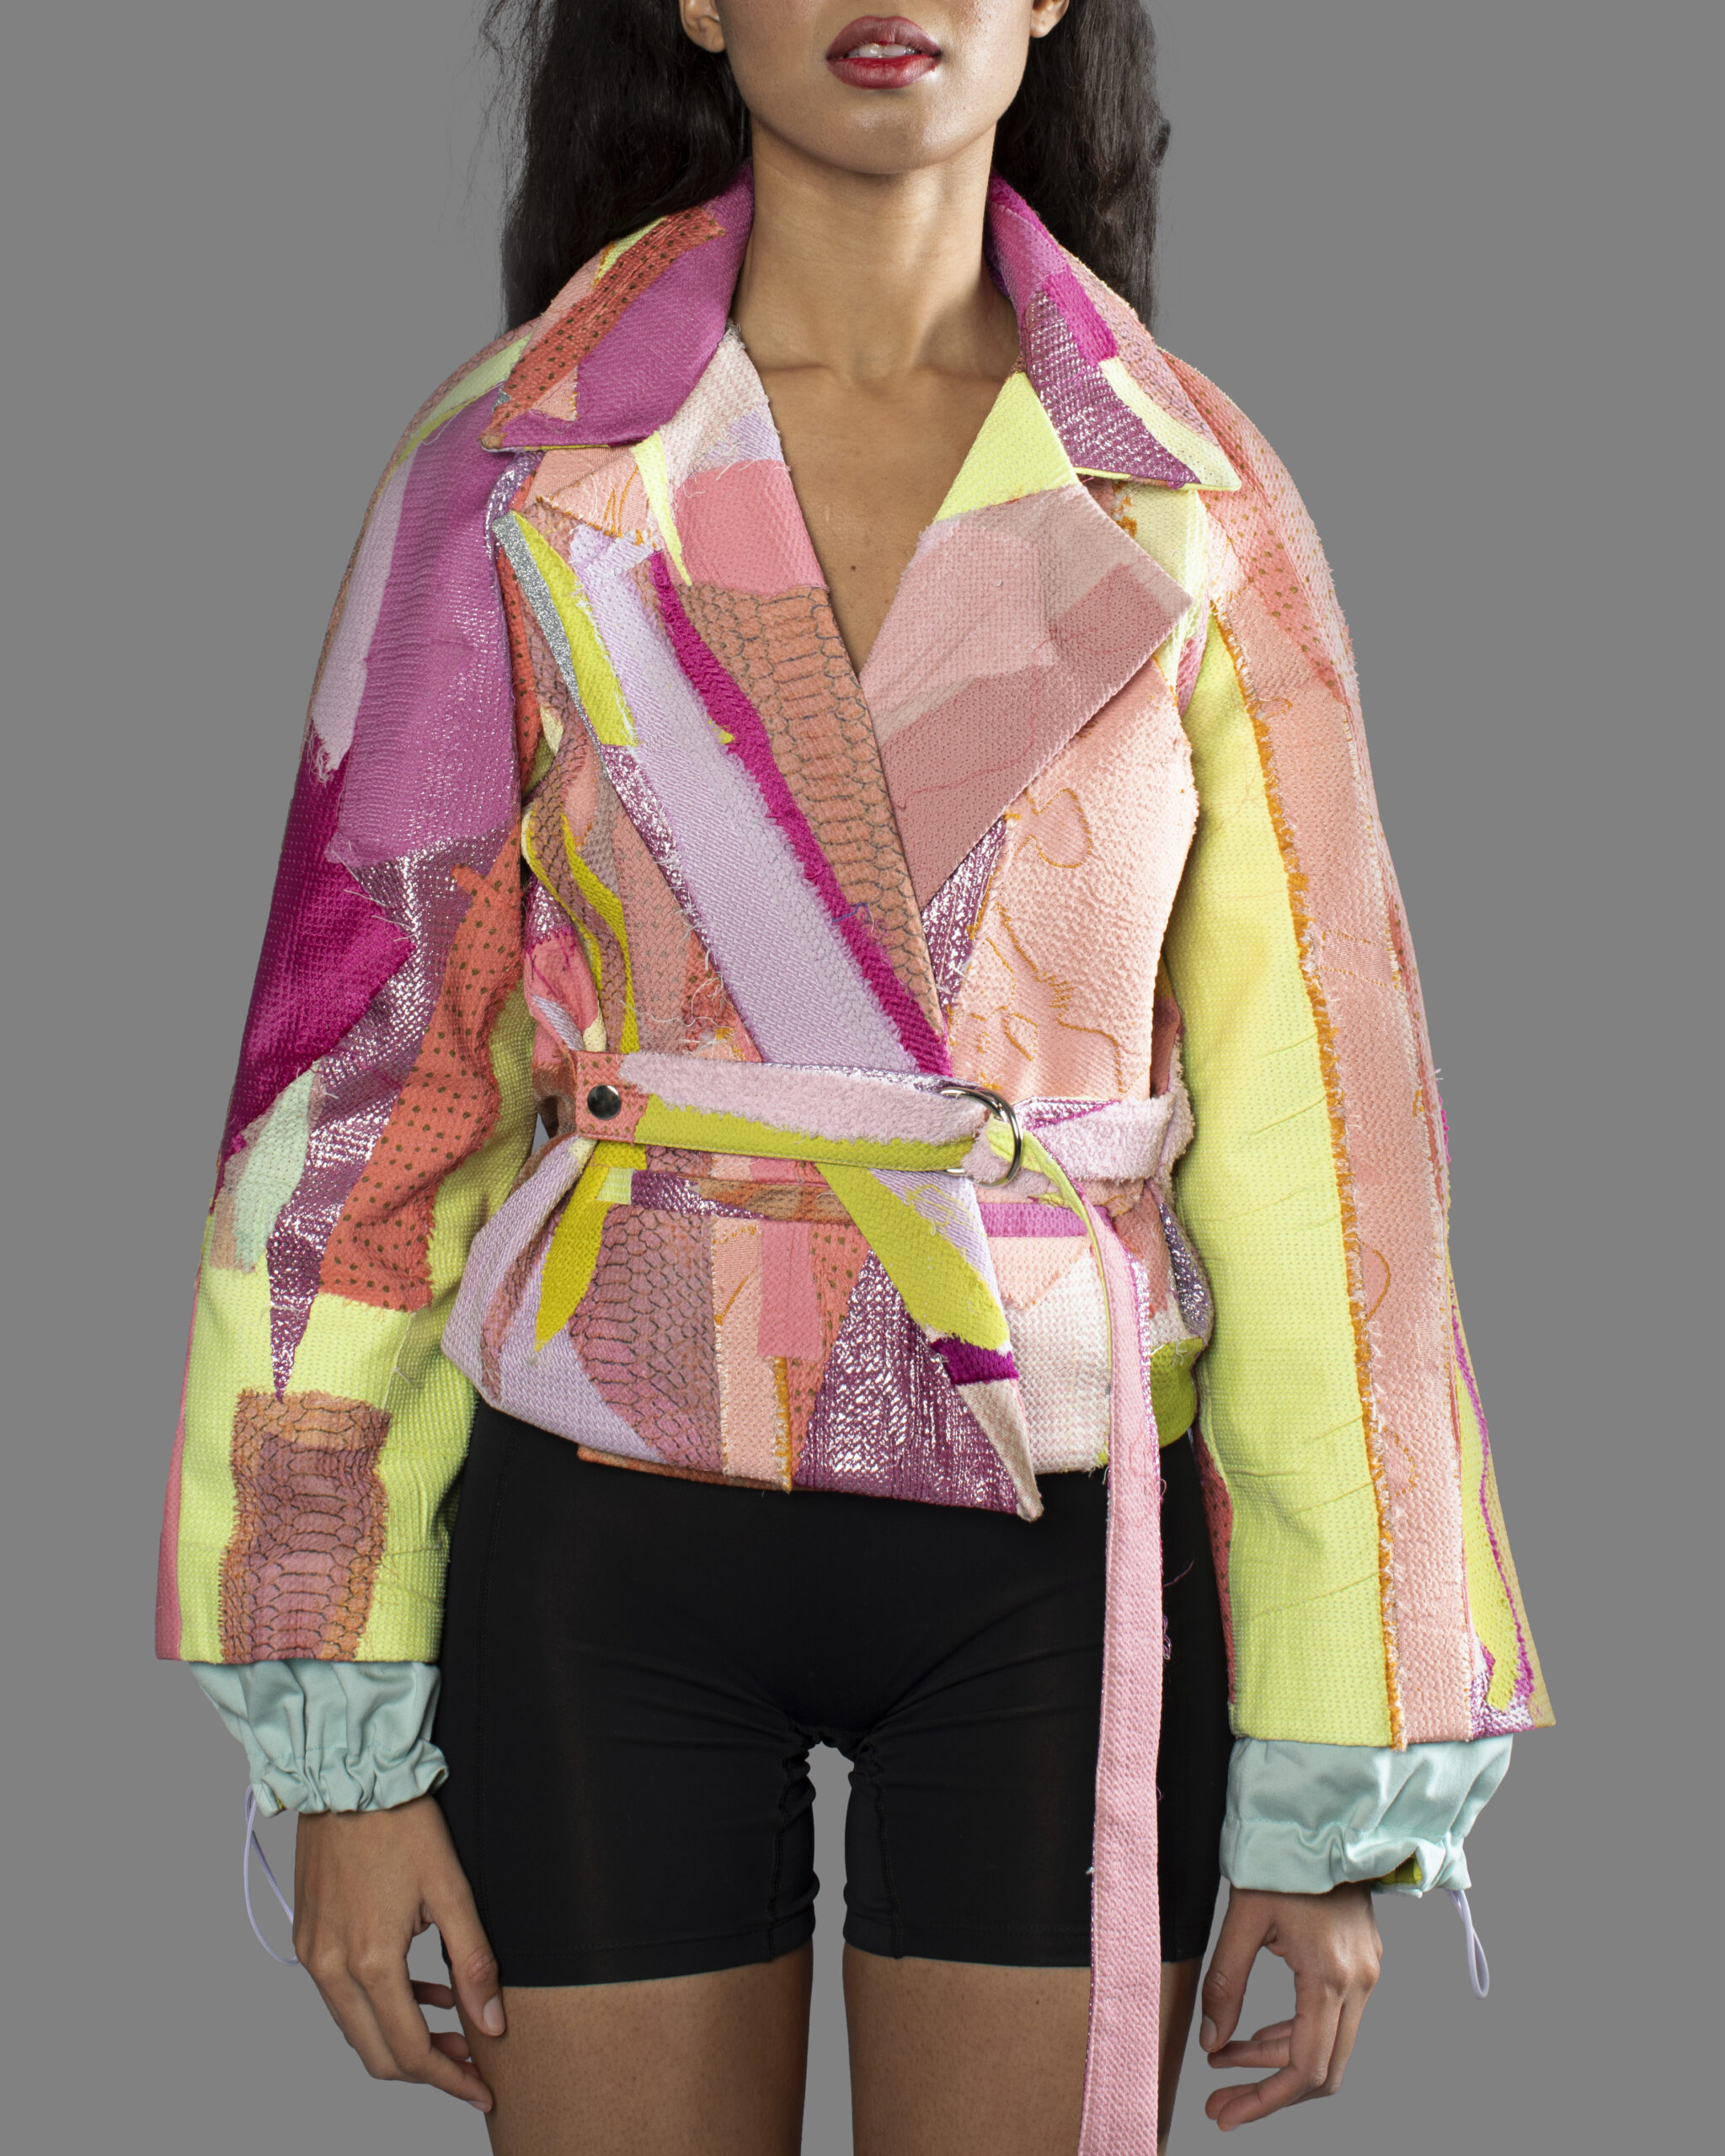 This is an image of a scrap suit jacket from the brand MiJA. It consists of mix of pink, yellow and green fabrics.